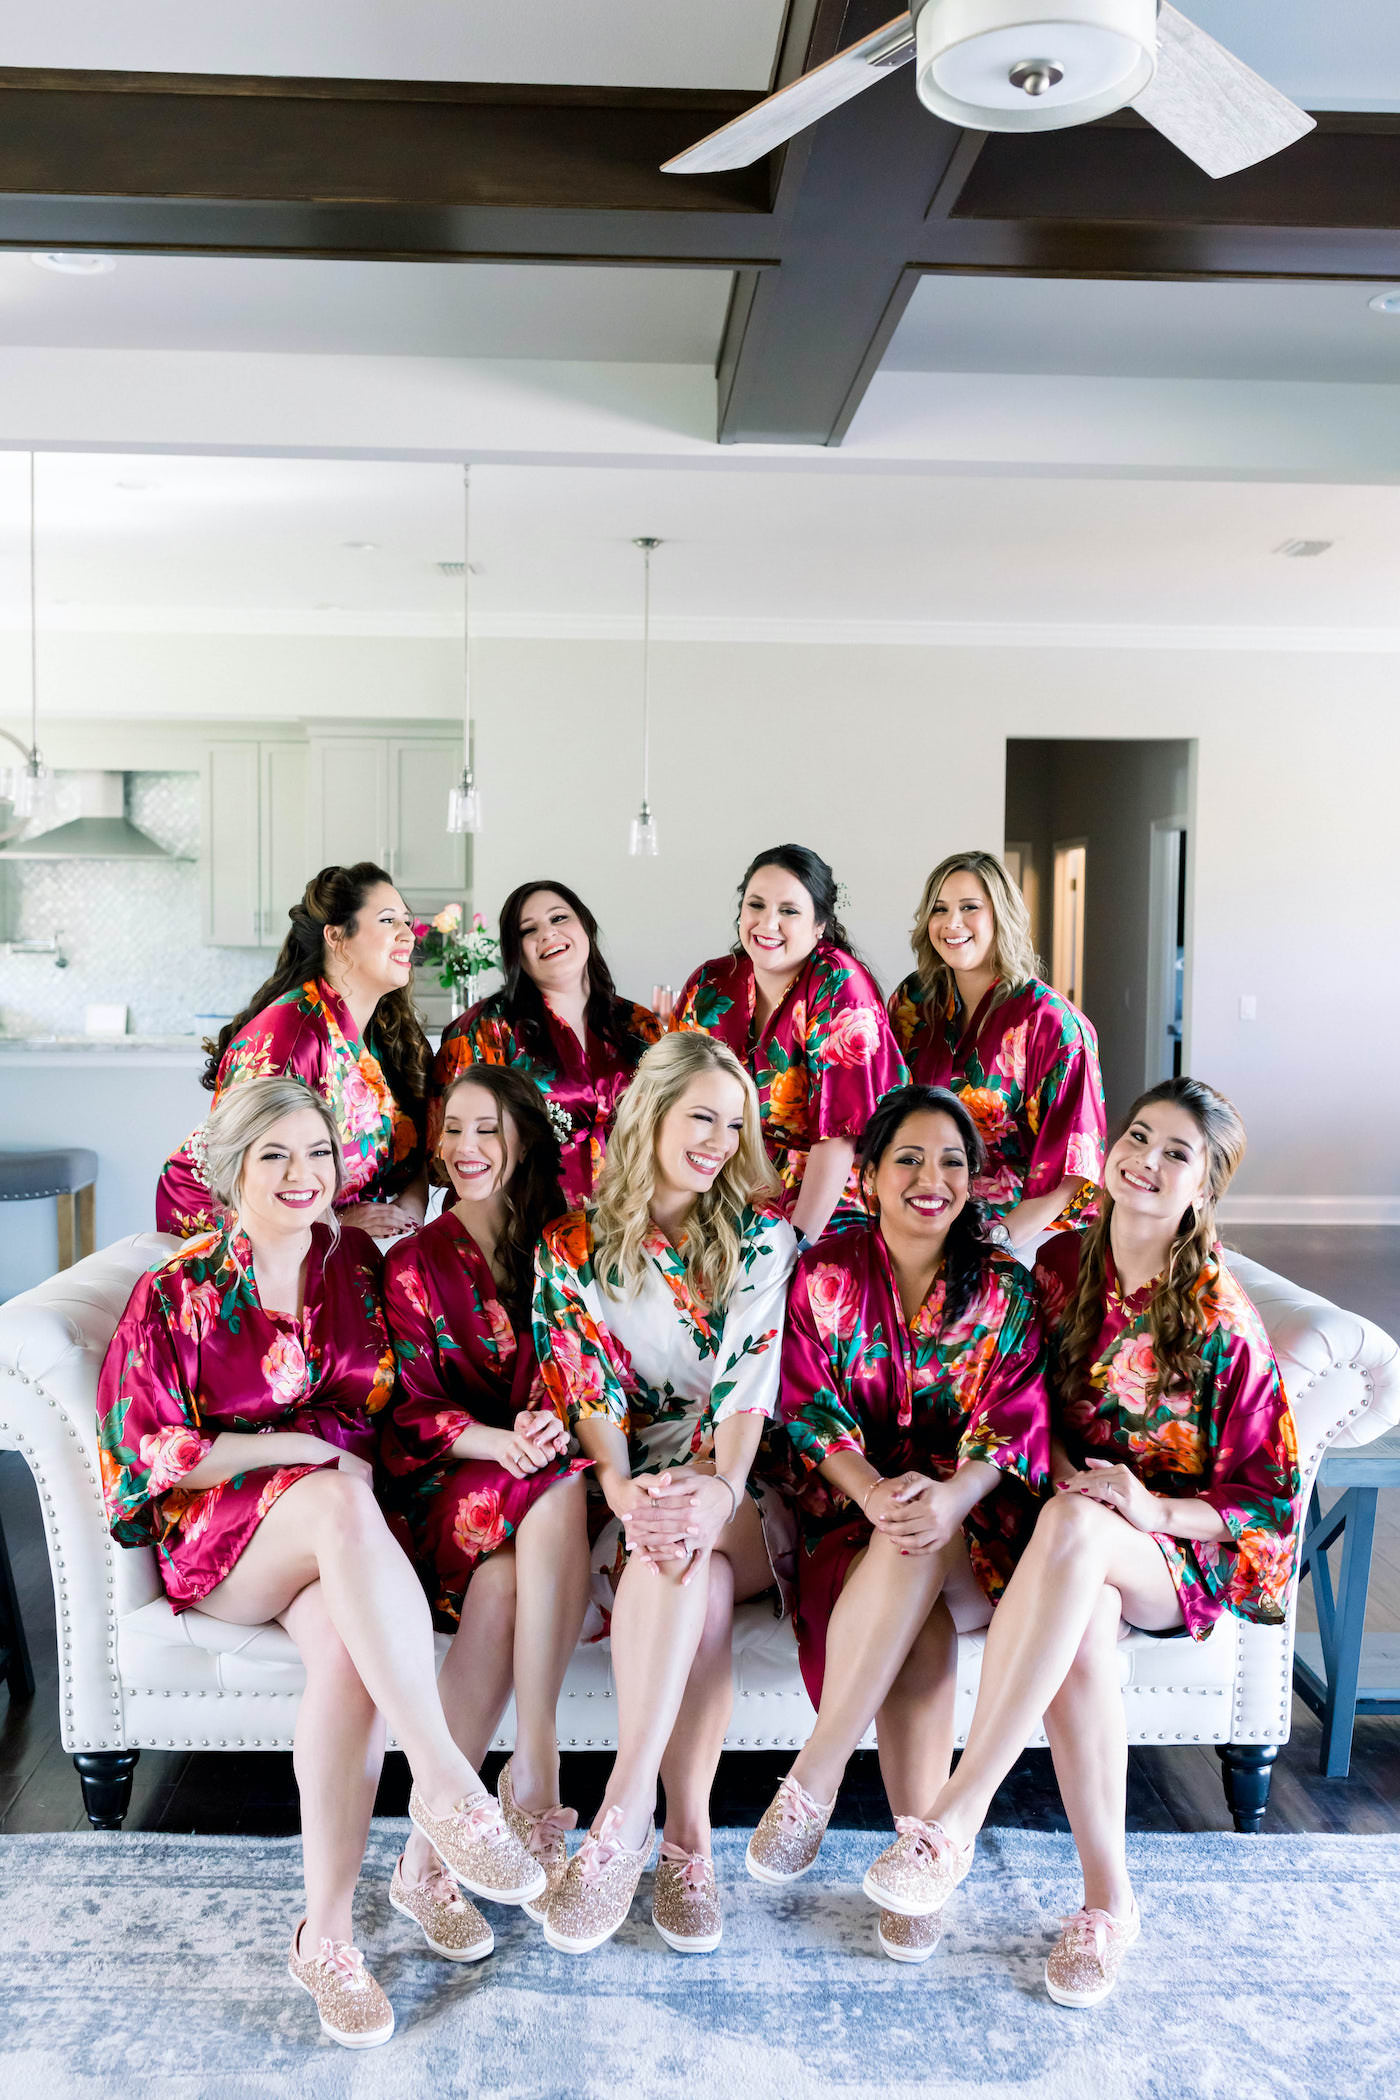 Bride and Bridesmaids Getting Ready in Burgundy Silk Floral Robes and Gold Glitter Kate Spade Tennis Shoes | Shauna and Jordon Photography